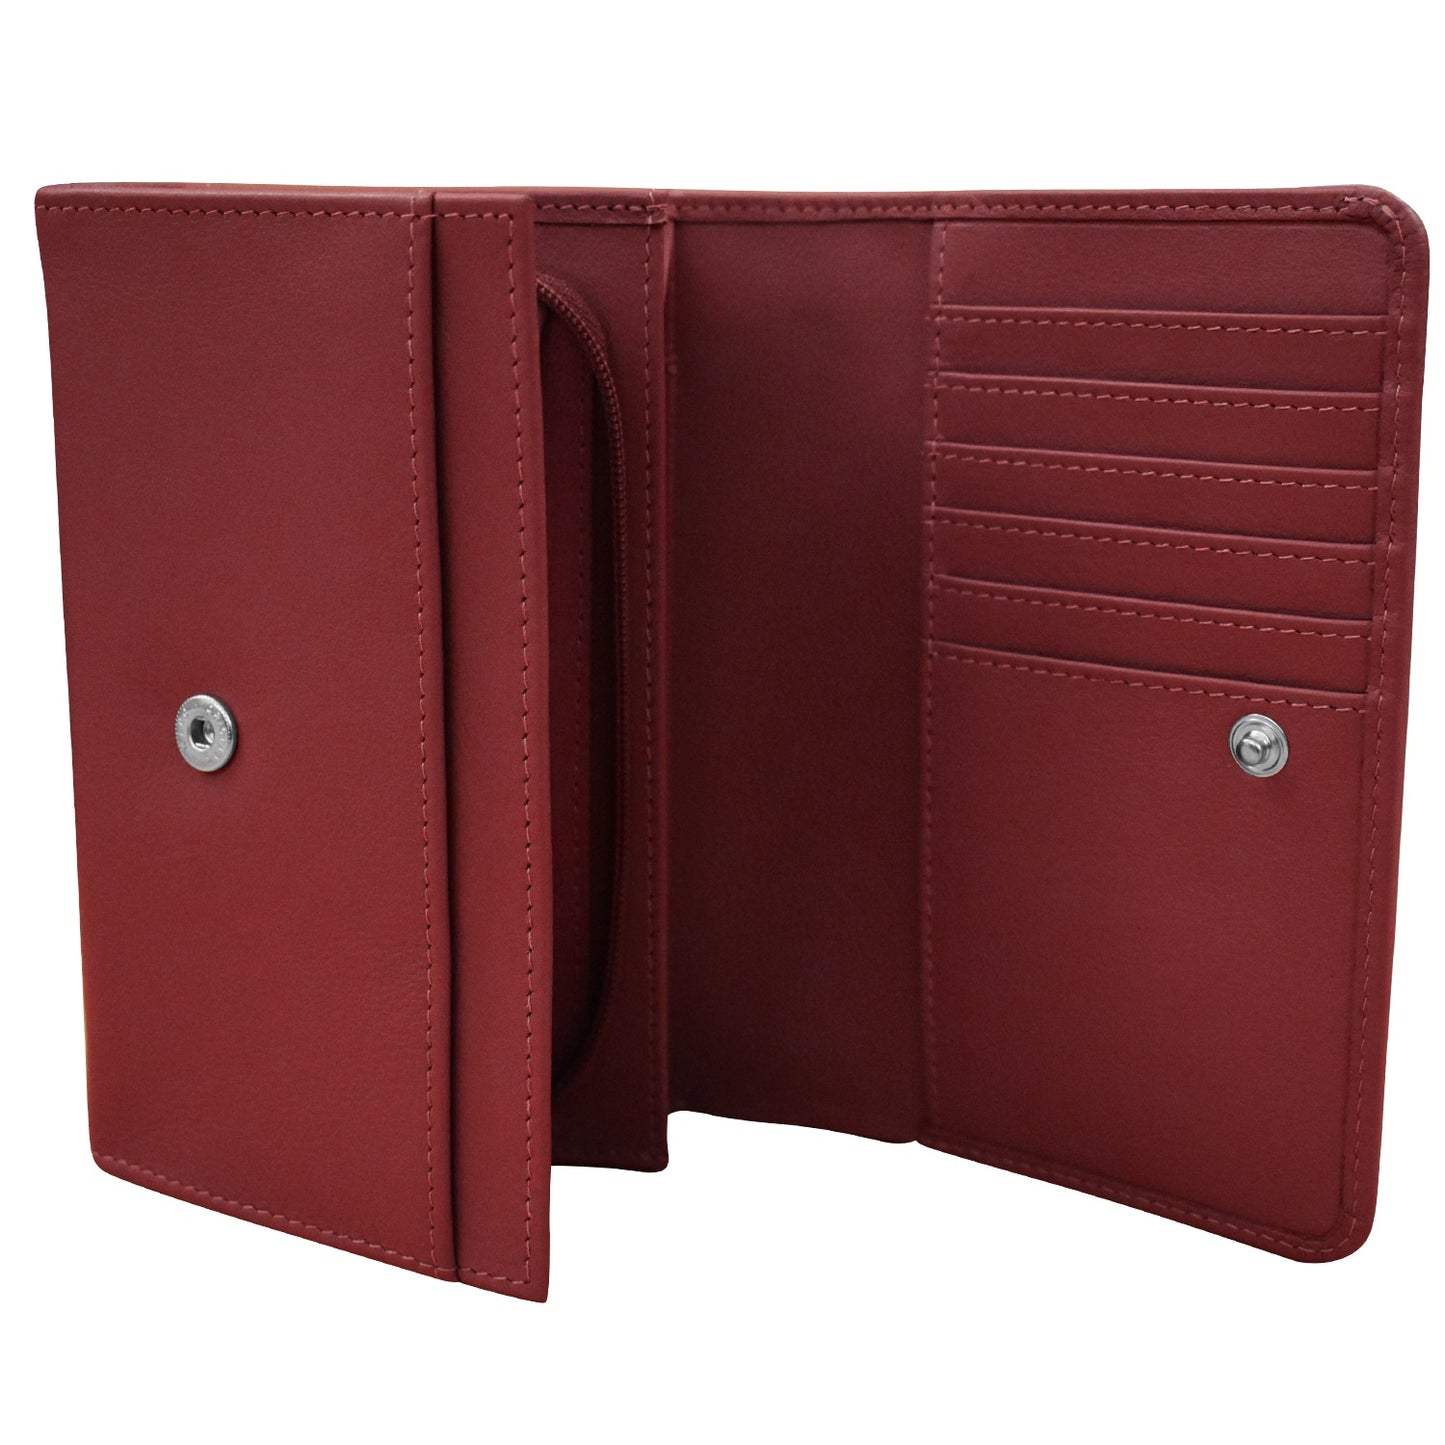 Leather French Wallet Merlot